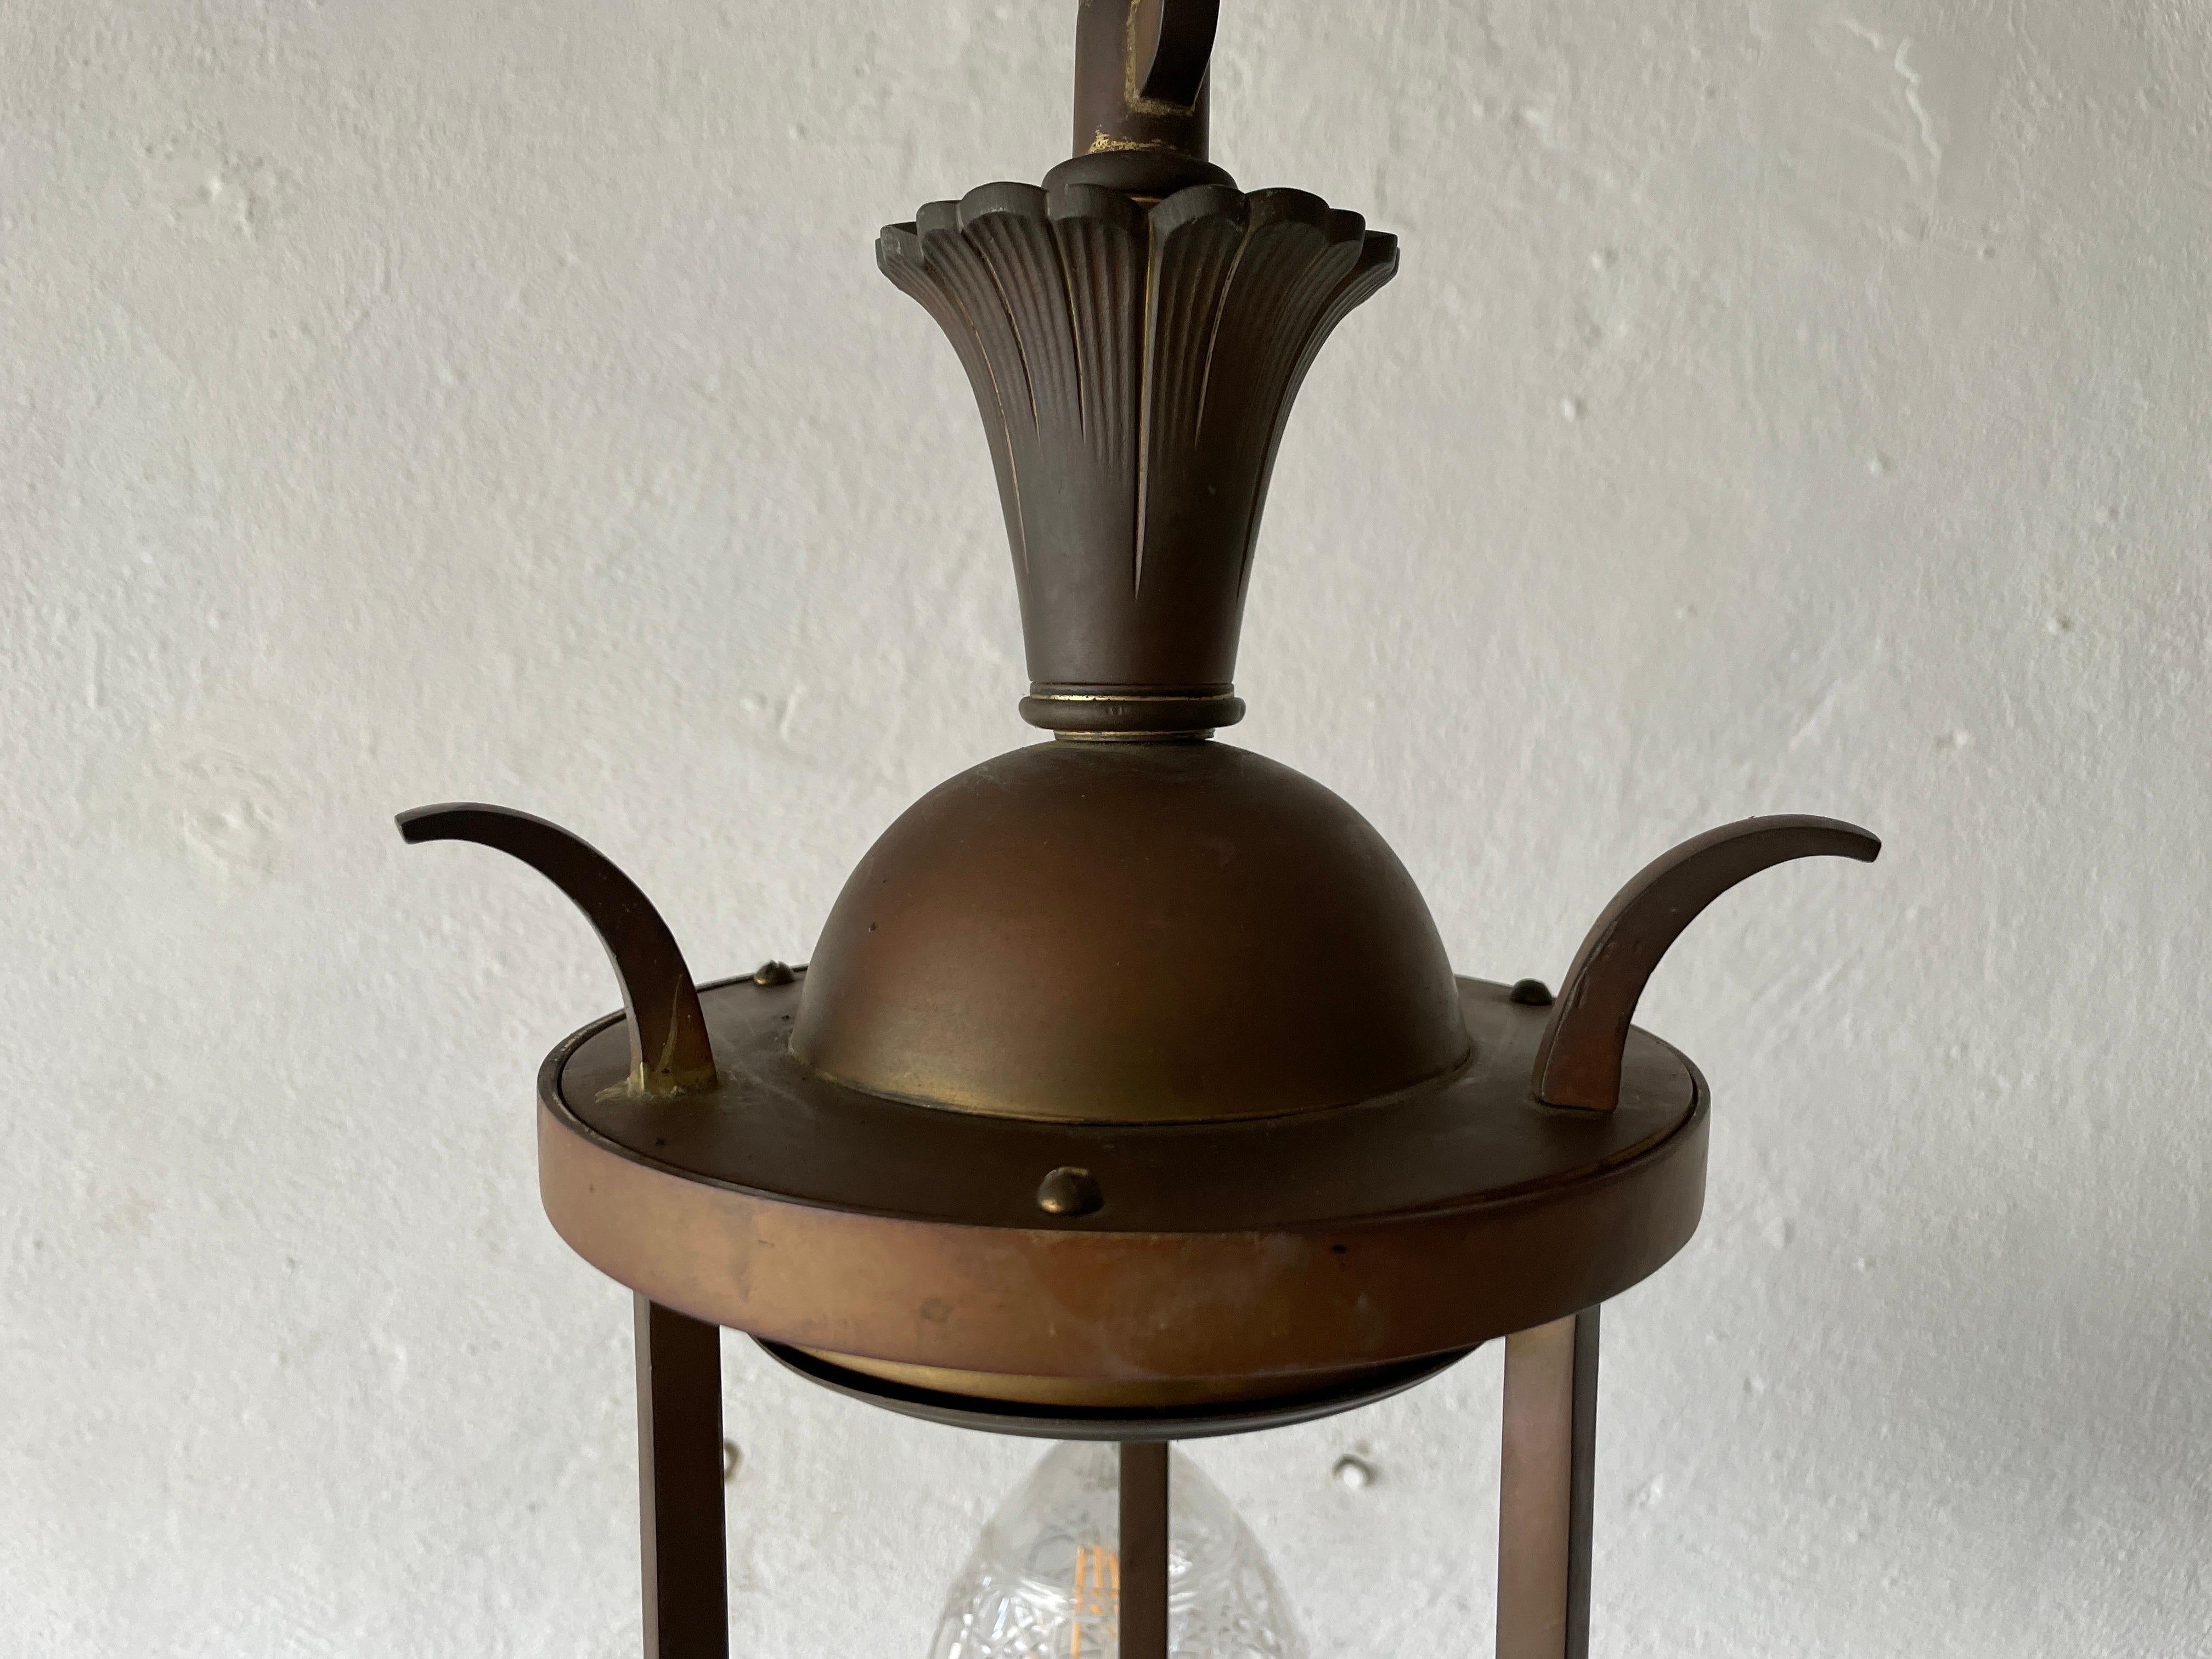 Unique French Copper Architectural Body Chandelier, 1940s, France For Sale 12